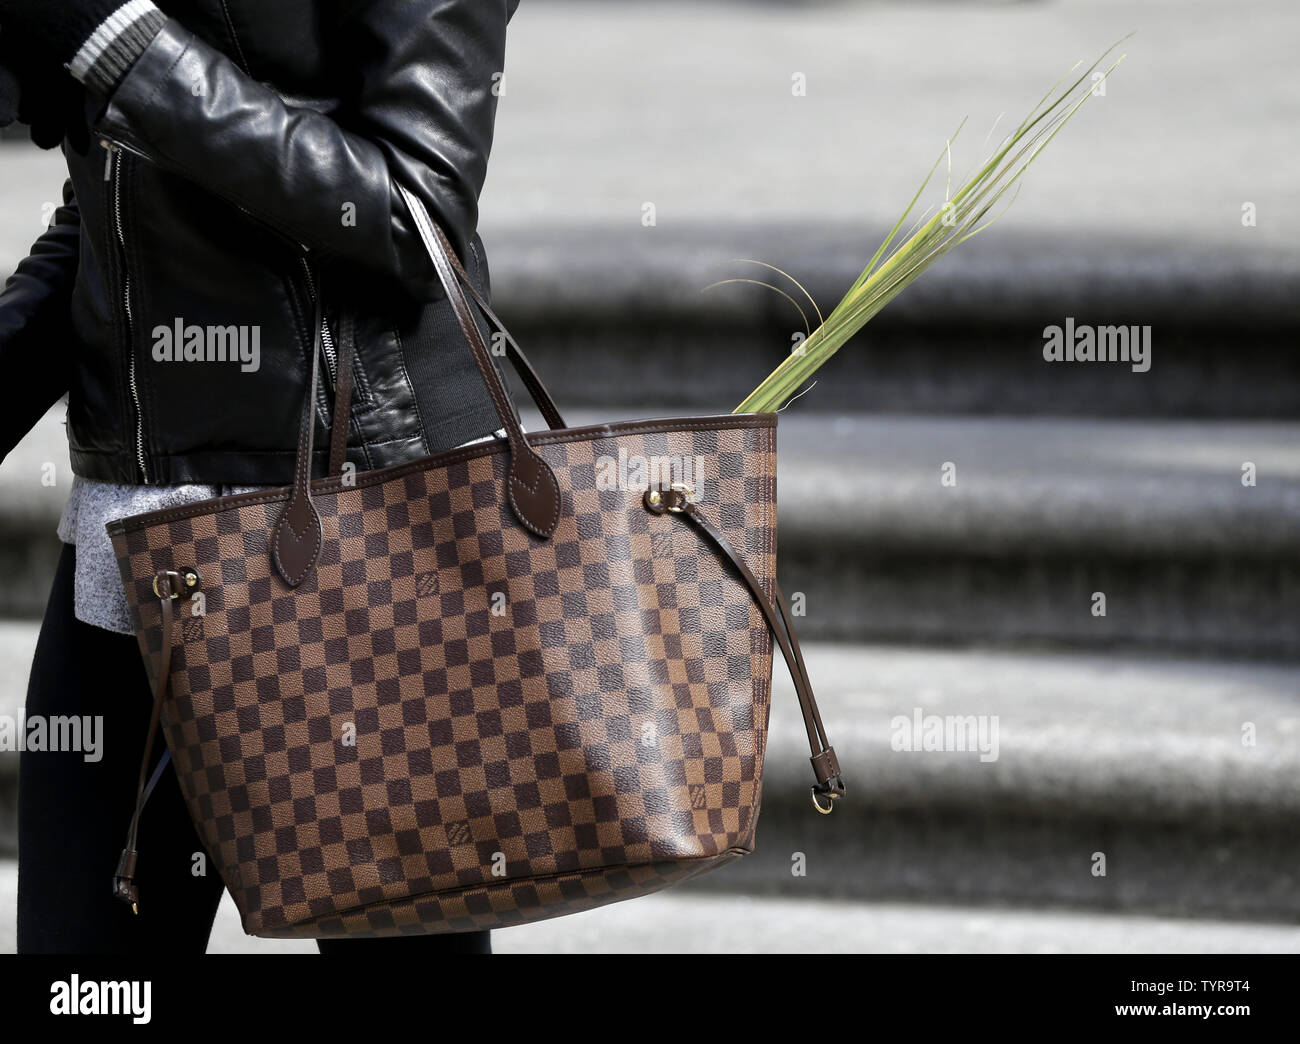 Louis Vuitton Bag Woman High Resolution Stock Photography and Images - Alamy